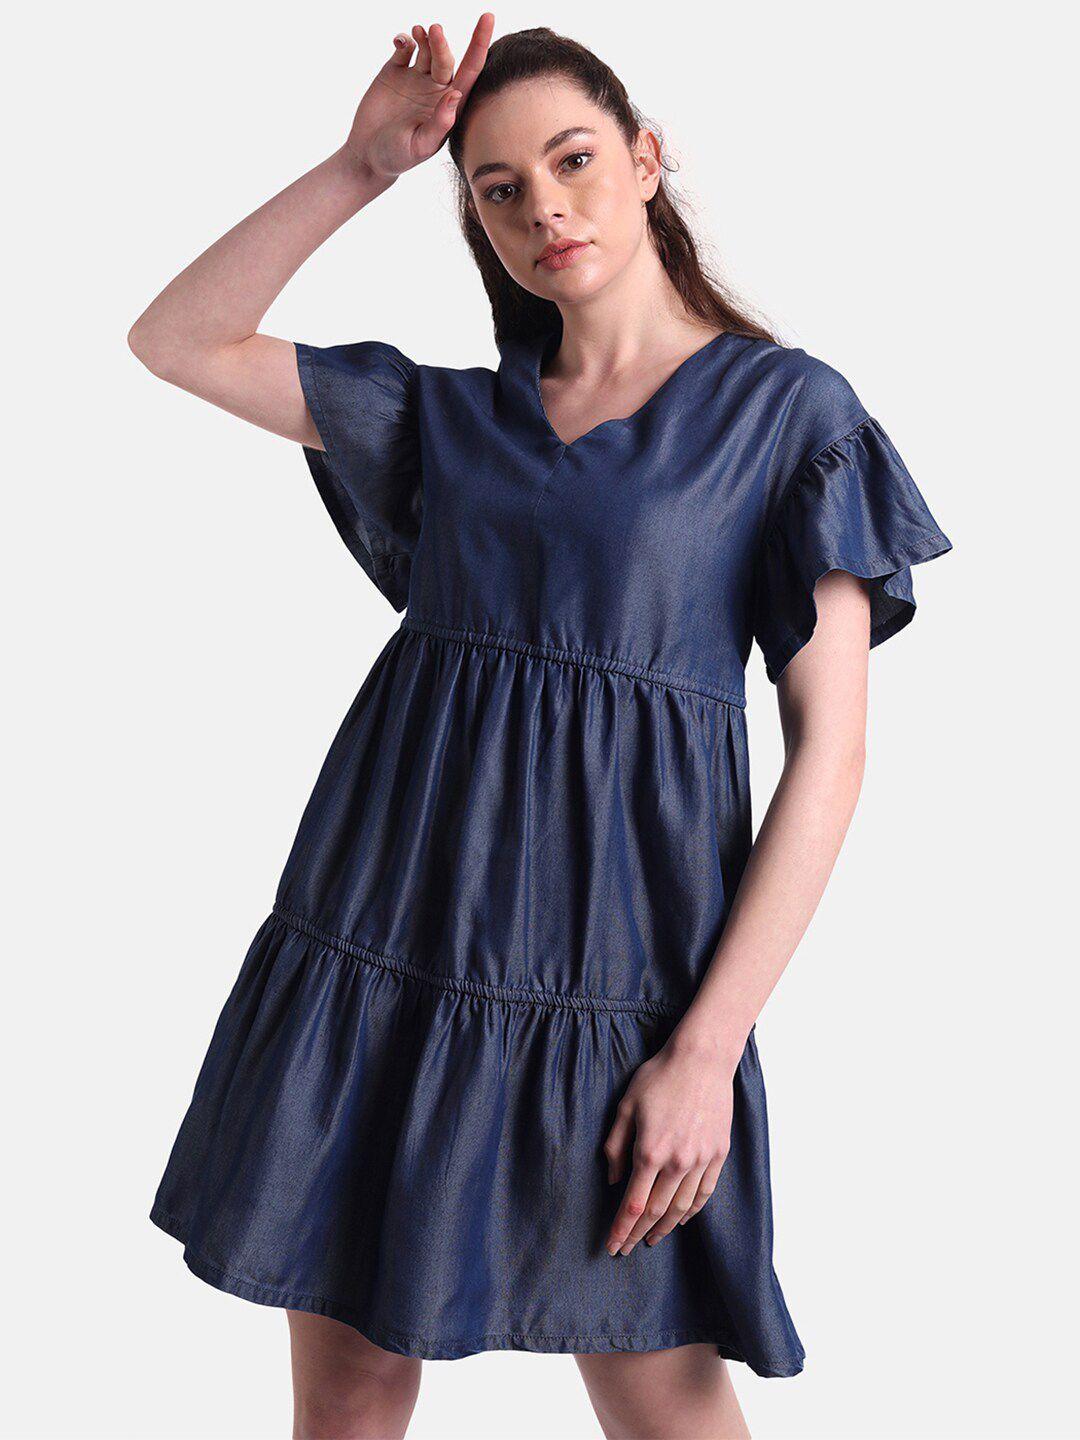 united-colors-of-benetton-women-navy-blue-tiered-dress